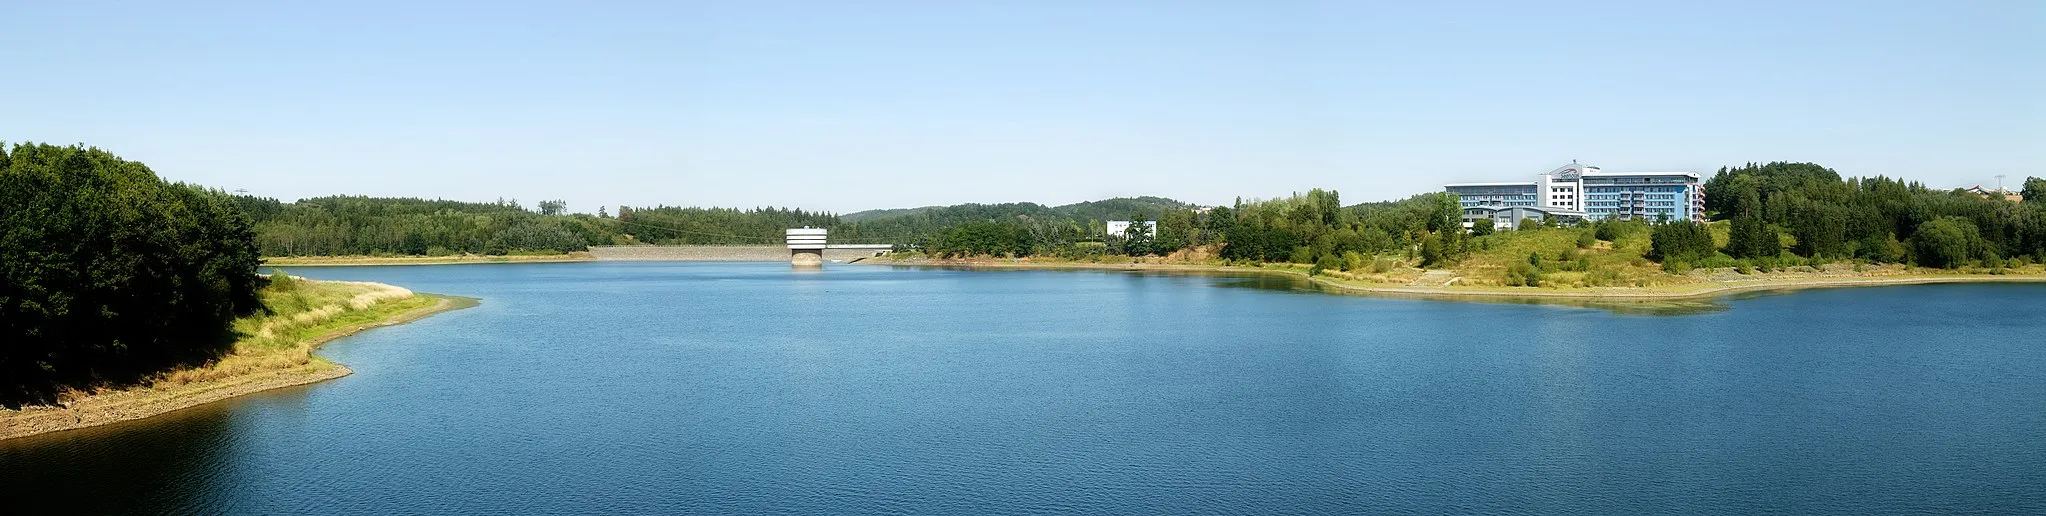 Photo showing: This image shows the dam in Zeulenroda ("Talsperre Zeulenroda), Germany. It is a three segment panoramic image.